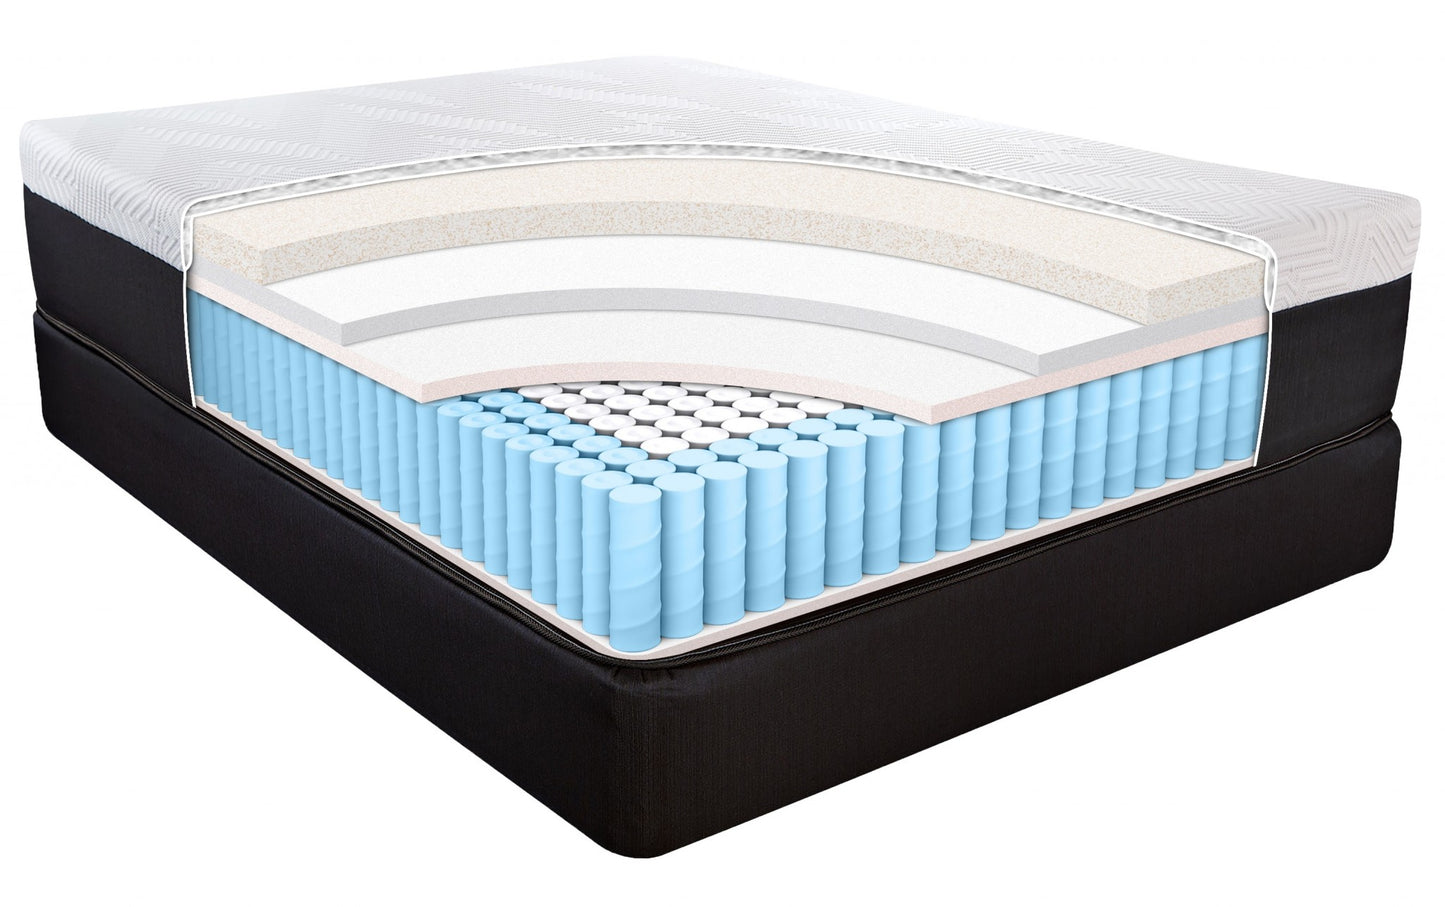 14" Hybrid Lux Memory Foam And Wrapped Coil Mattress Queen